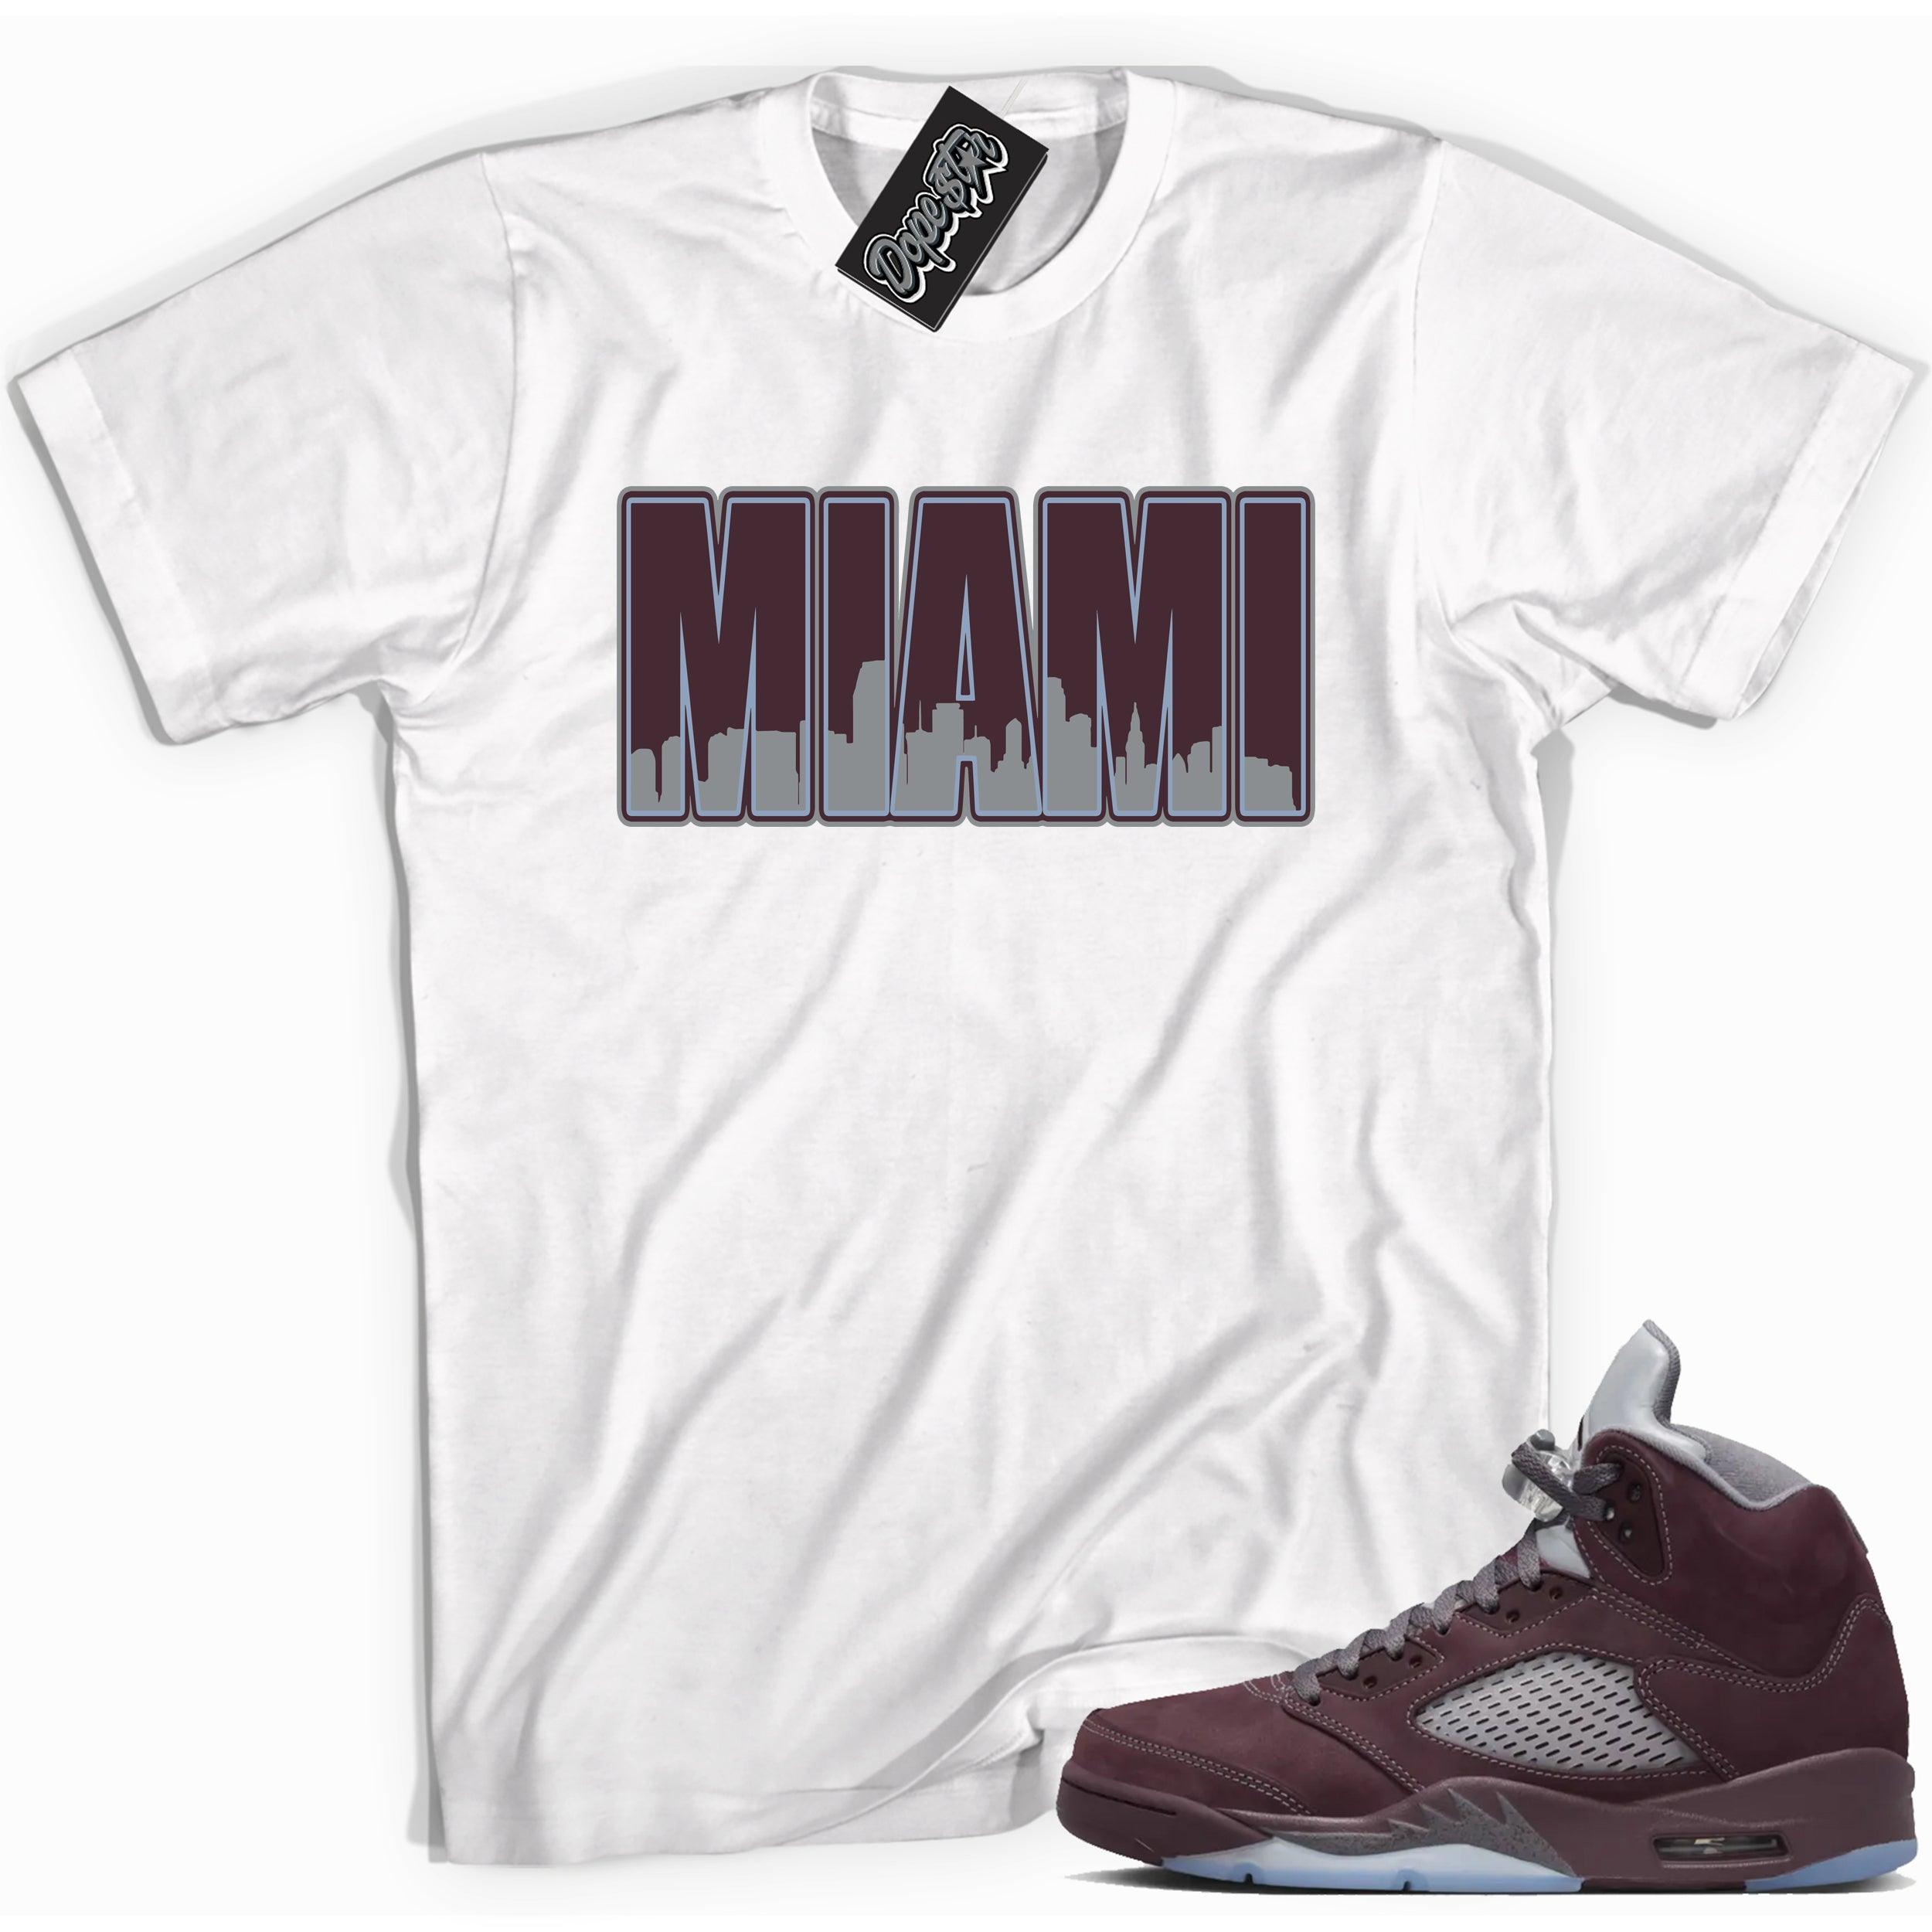 Cool White graphic tee with “ MIAMI  ” print, that perfectly matches Air Jordan 5 Burgundy 2023 sneakers 